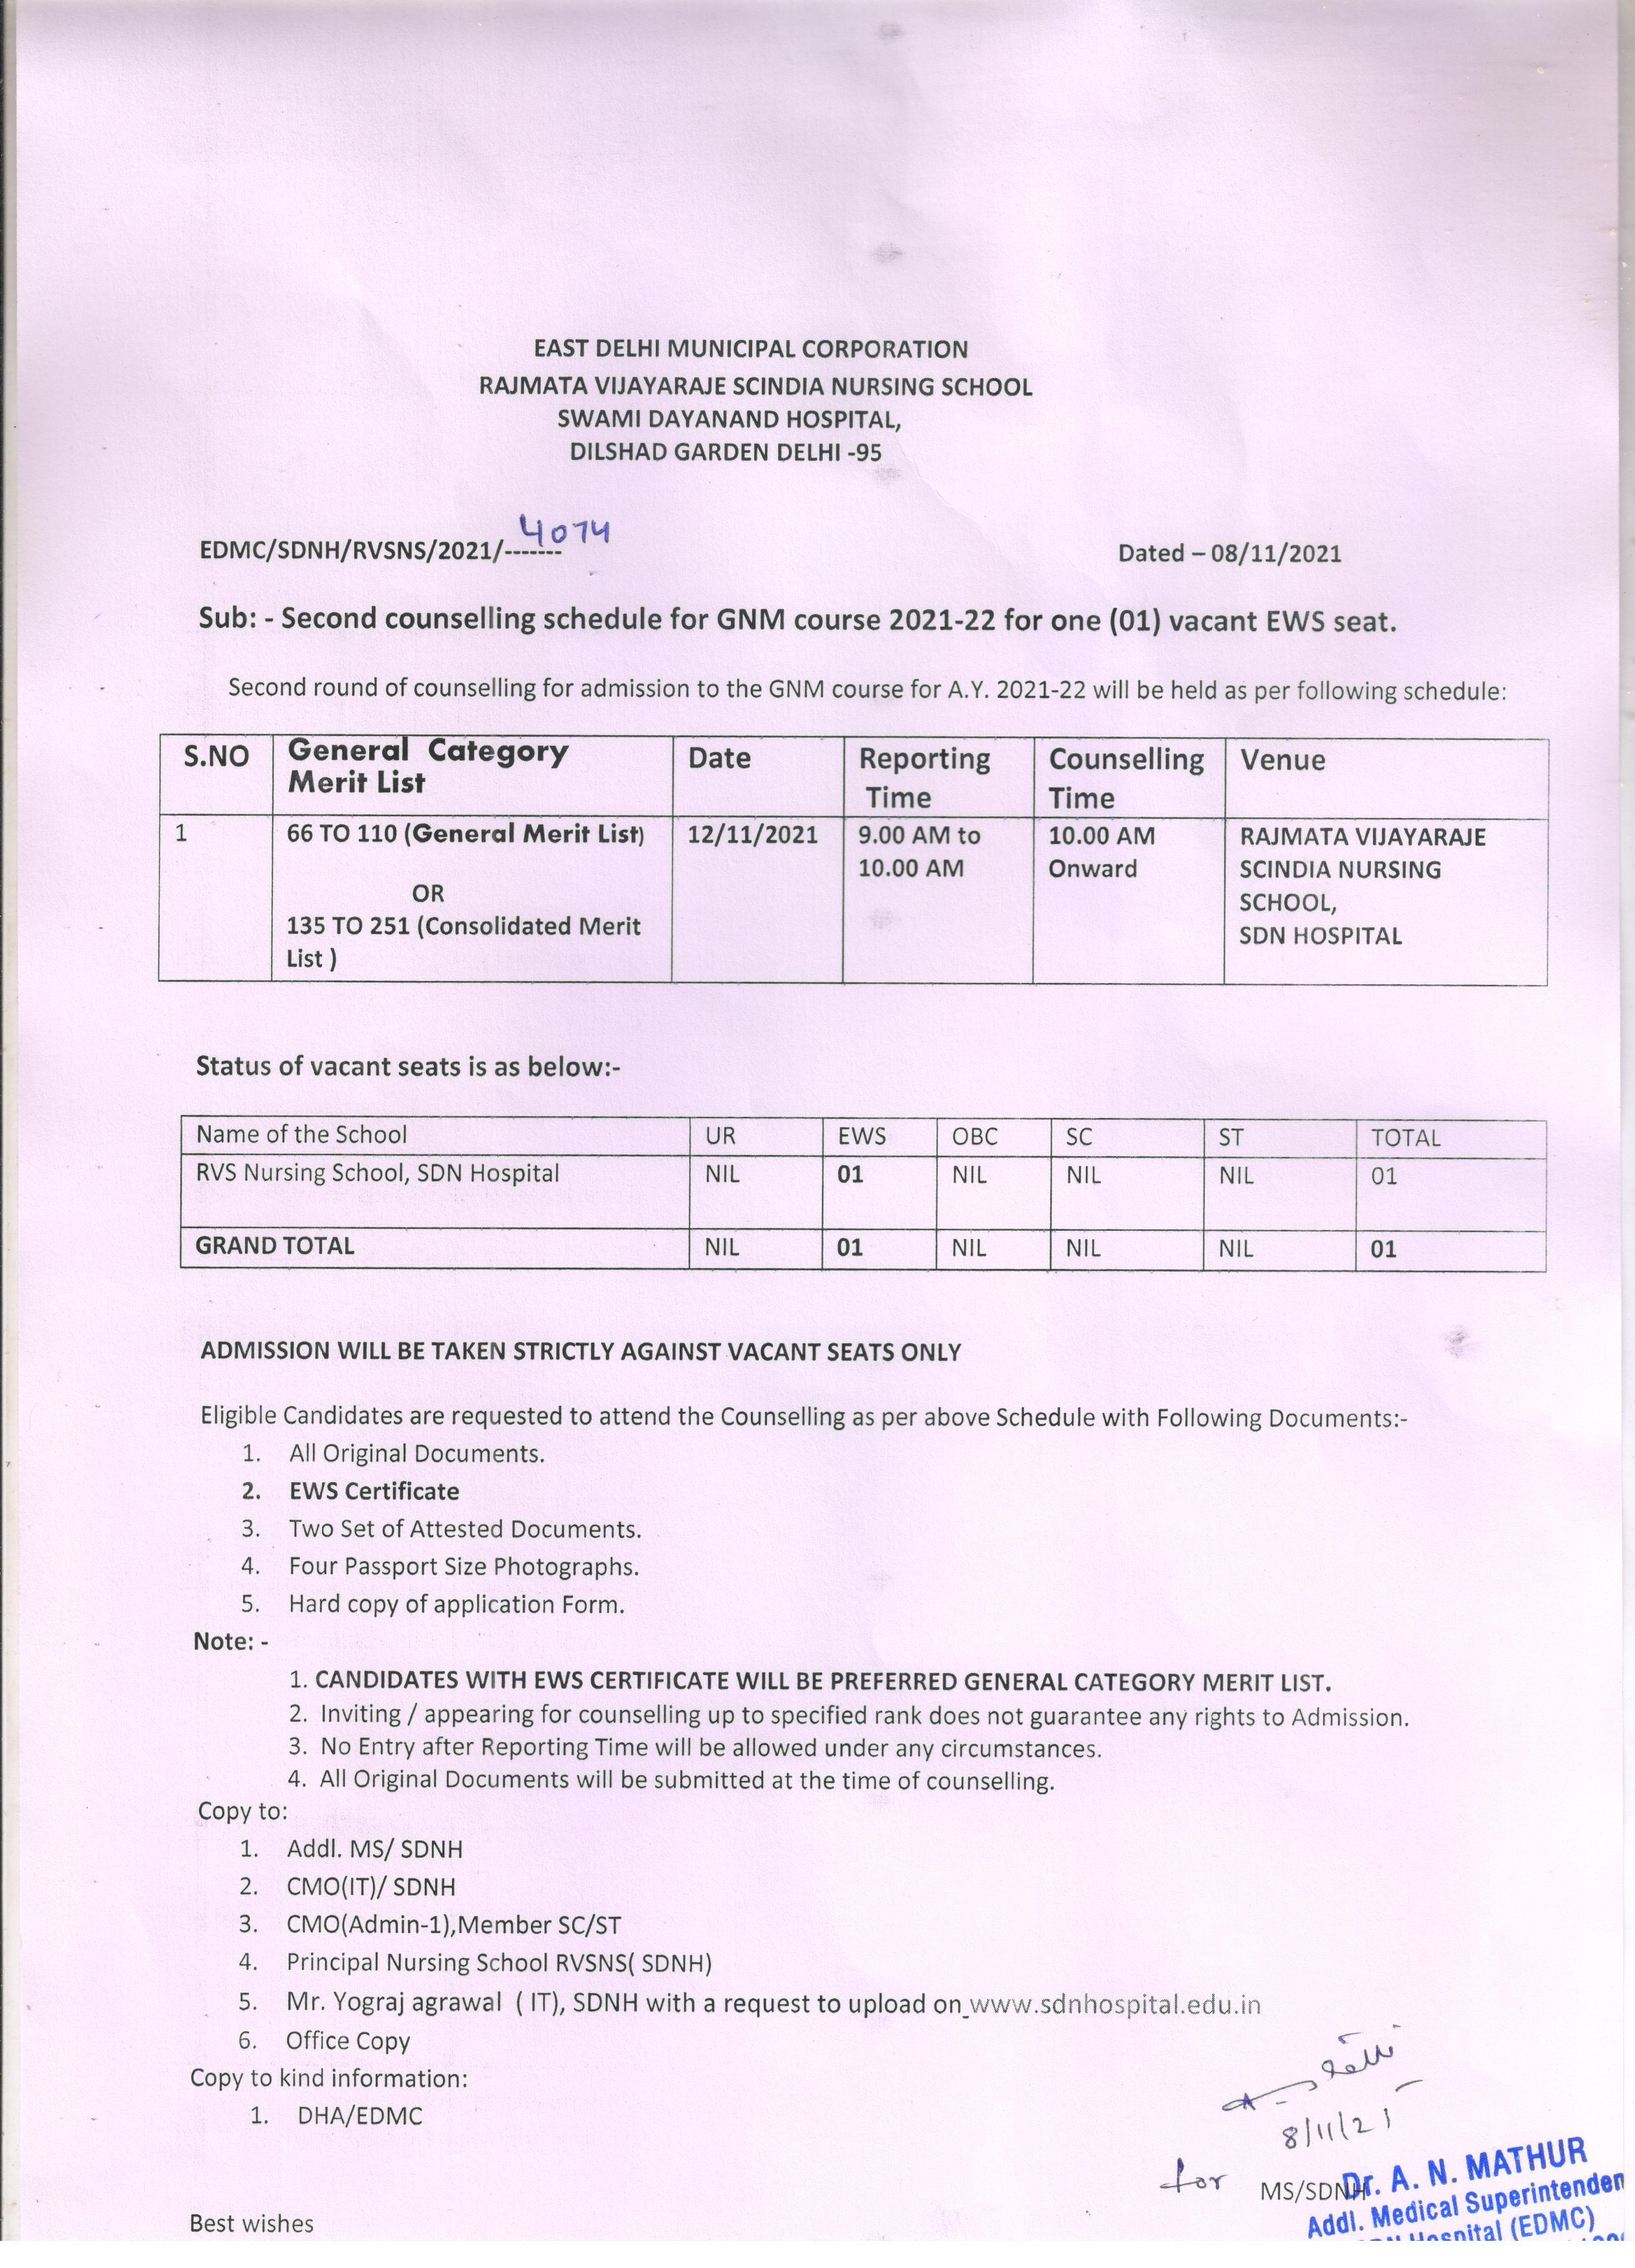 Second Counselling schedule for GNM course 2021-22 for one (1) vacant EWS seat 